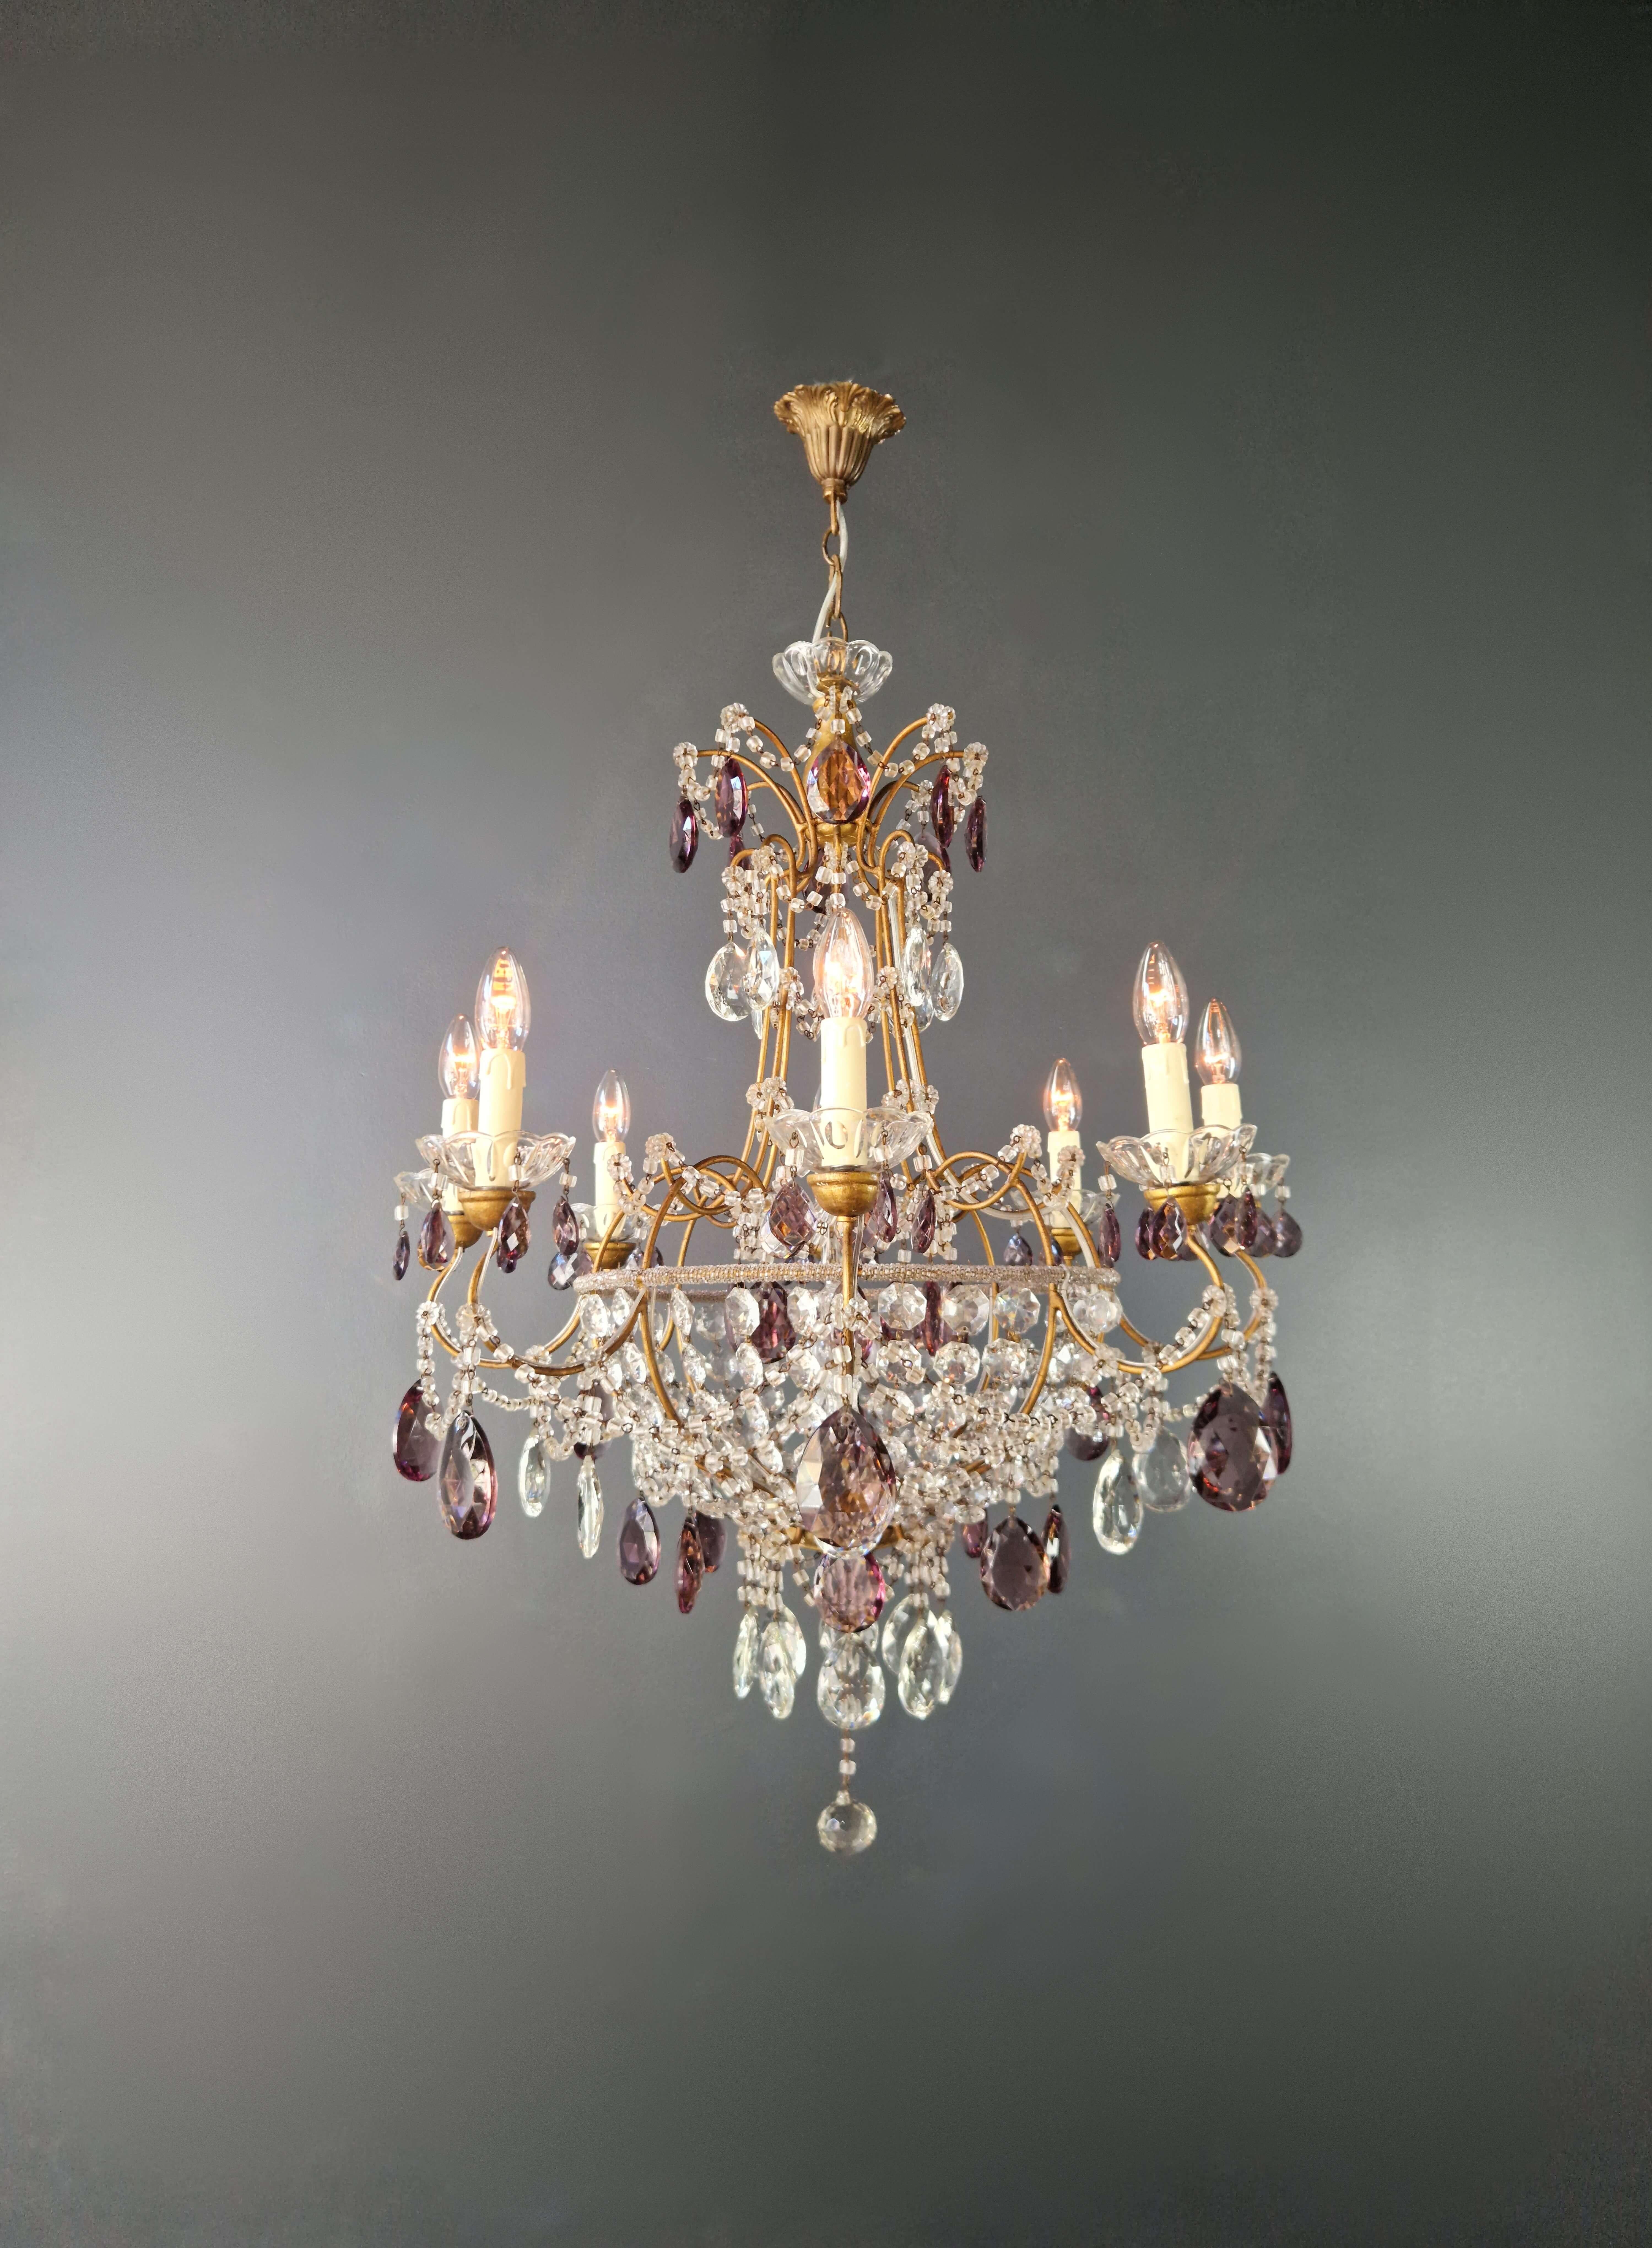 Introducing our exquisite antique crystal chandelier, a masterpiece that embodies the elegance of Italy.

With a height of 90 cm and a diameter of 72 cm, this chandelier exudes timeless charm. It weighs approximately 8kg and has 8 E14 bulb holders